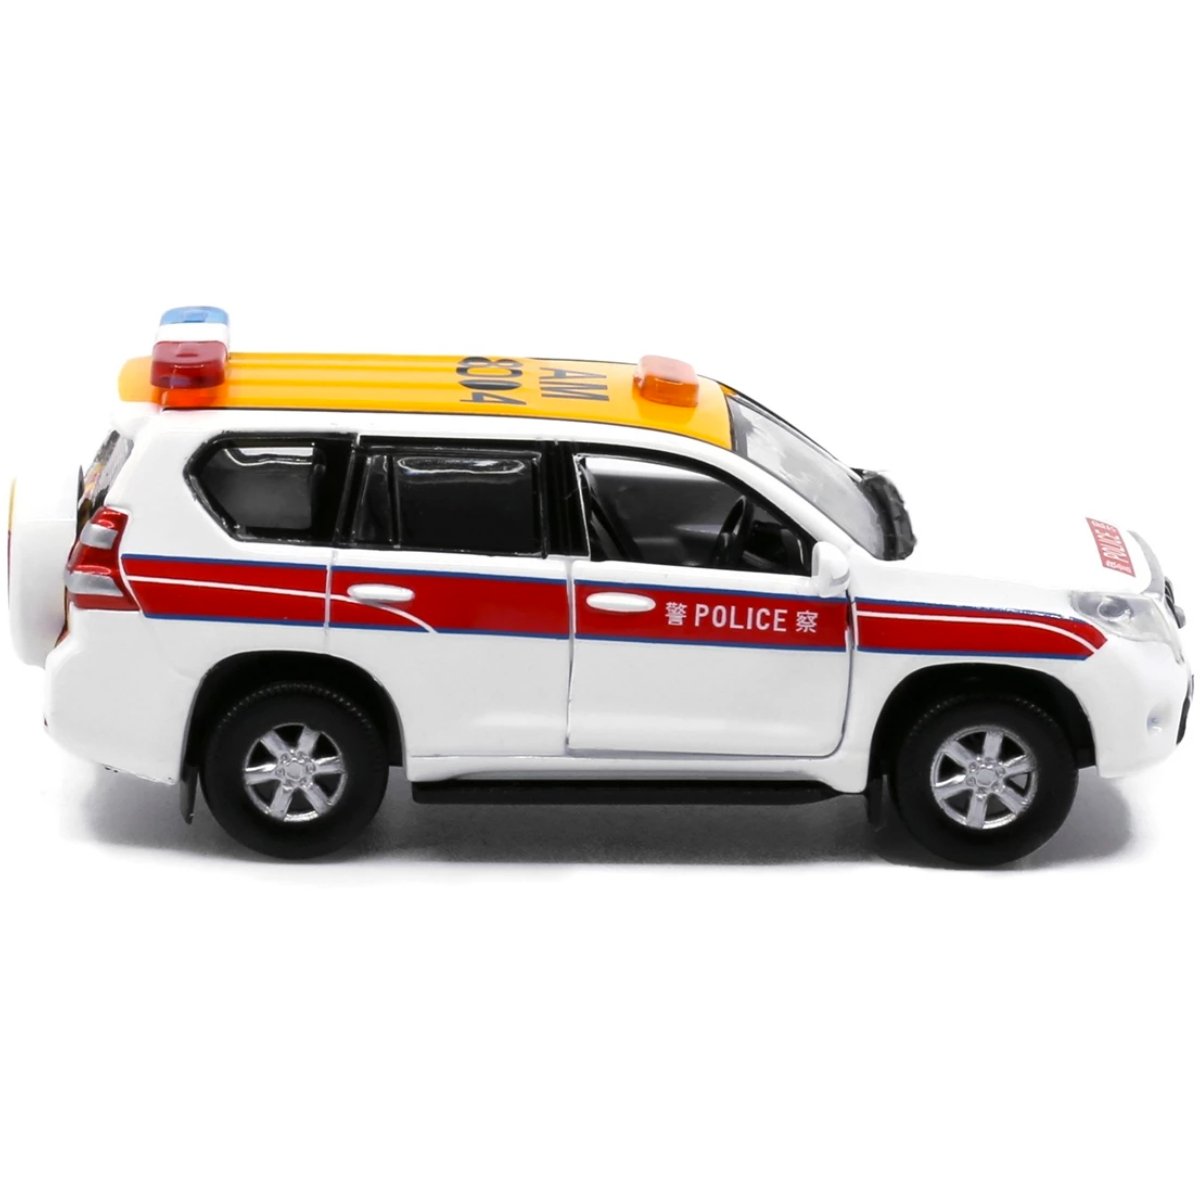 Tiny Models Toyota Prado Police - Airport District (1:64 Scale) - Phillips Hobbies